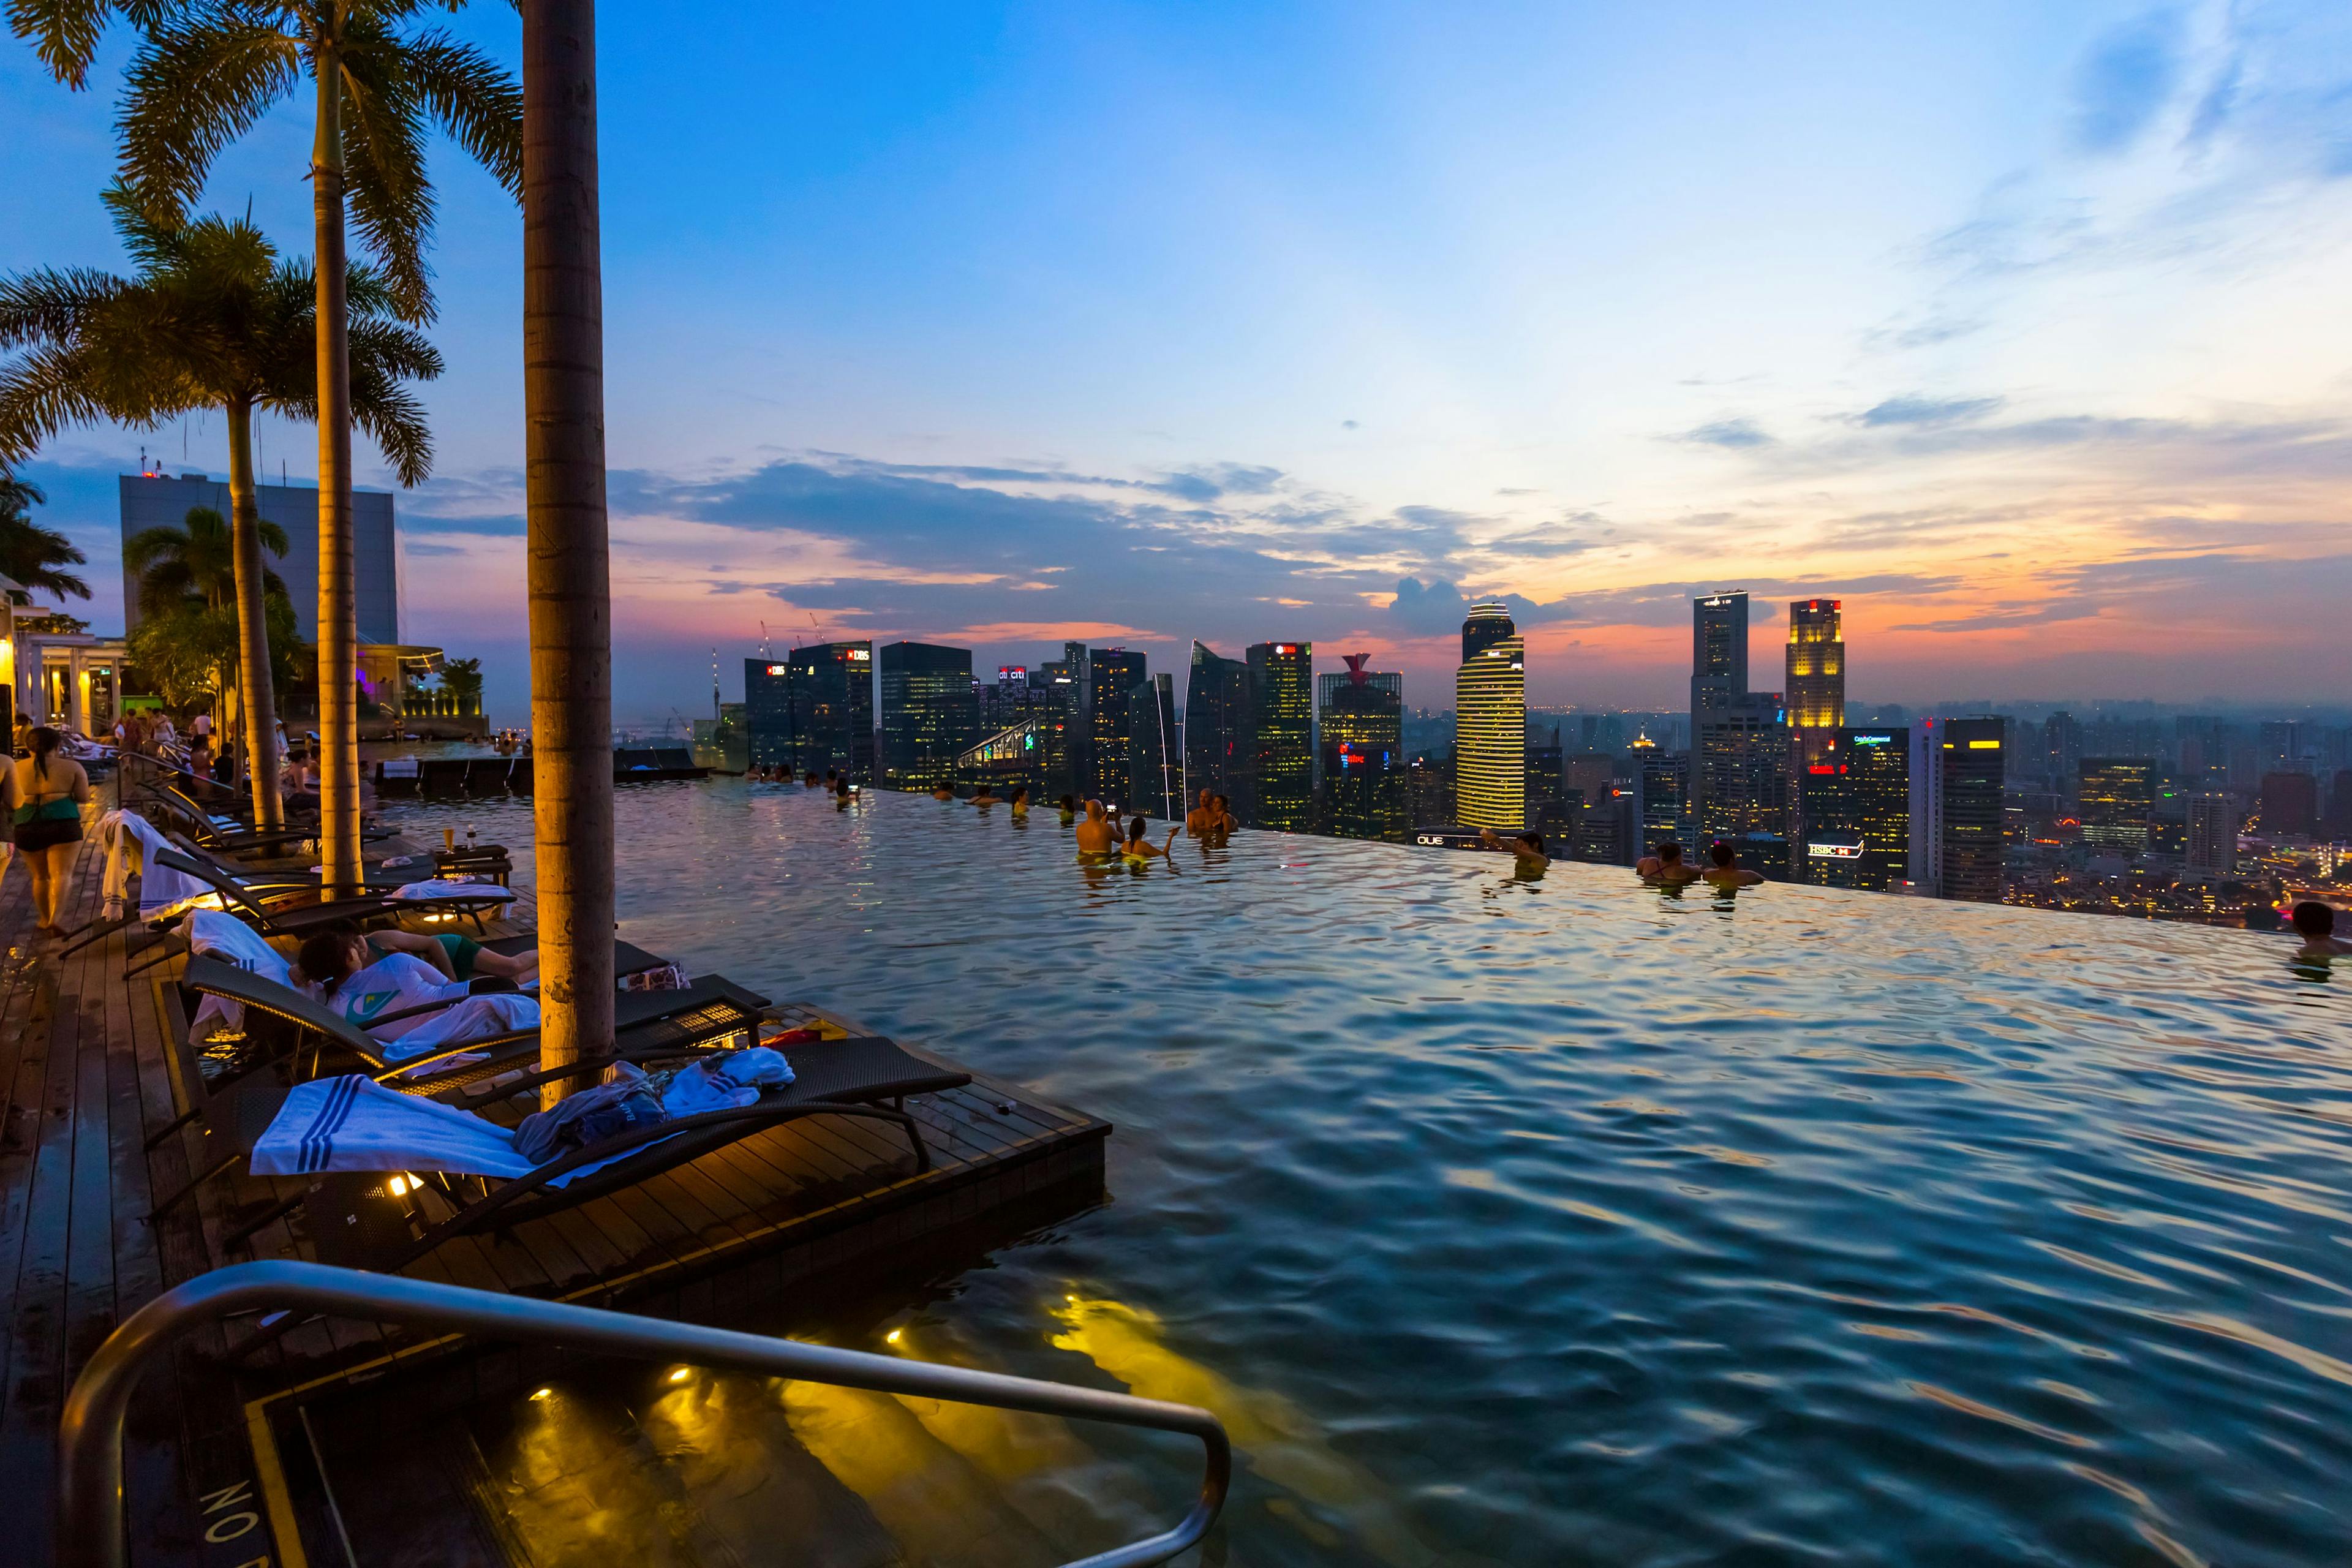 Pool in Marina Bay Sands in Singapore